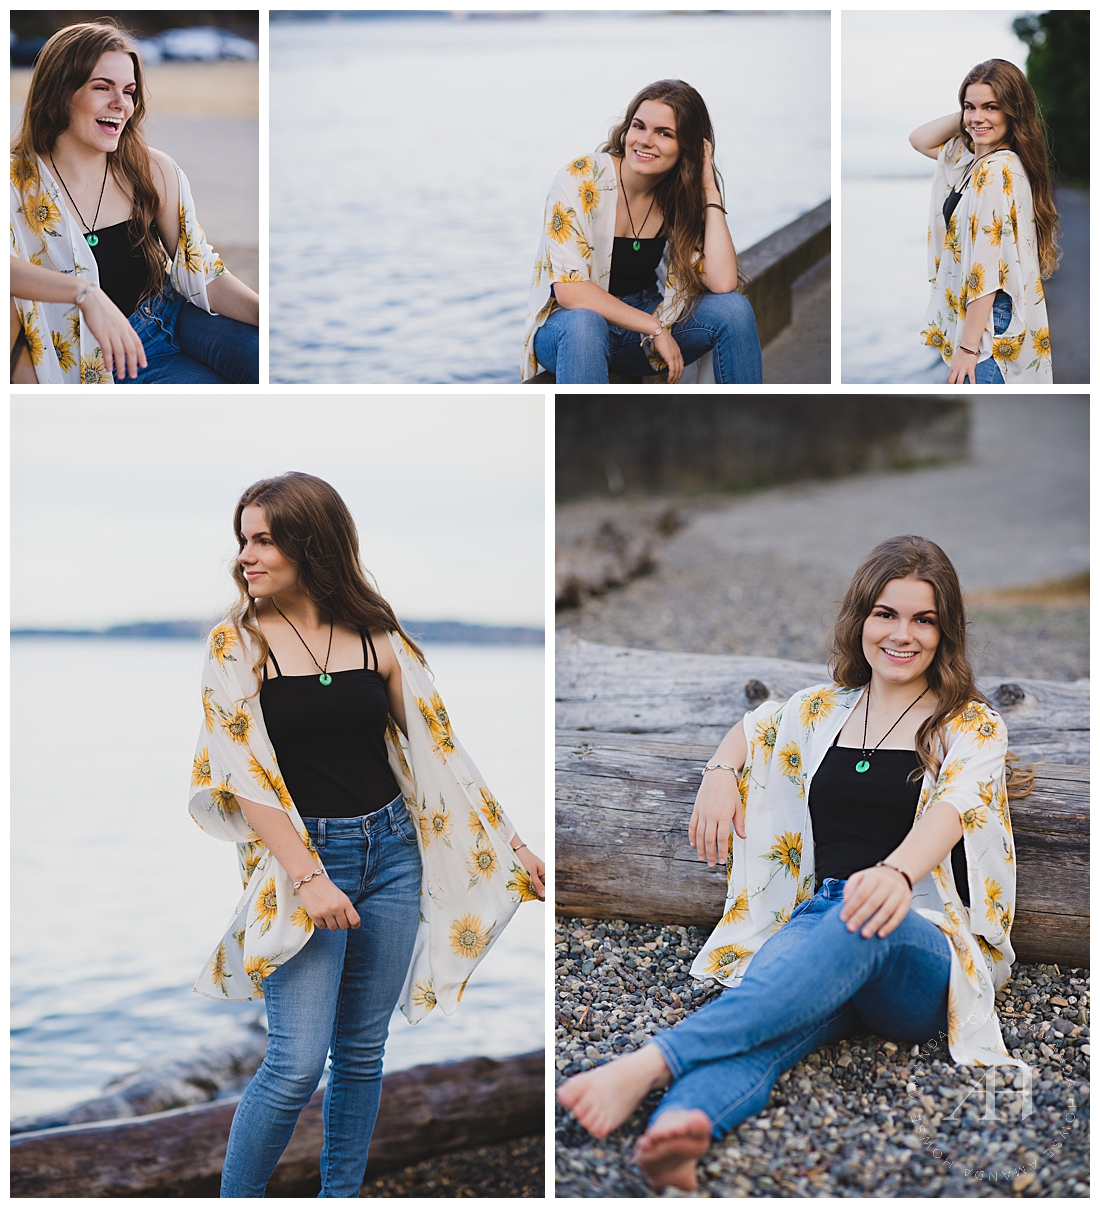 Summer Senior Portraits | Pose ideas for beachy senior portraits, how to style a senior portrait session on the beach | Photographed by the Best Tacoma Senior Portrait Photographer Amanda Howse